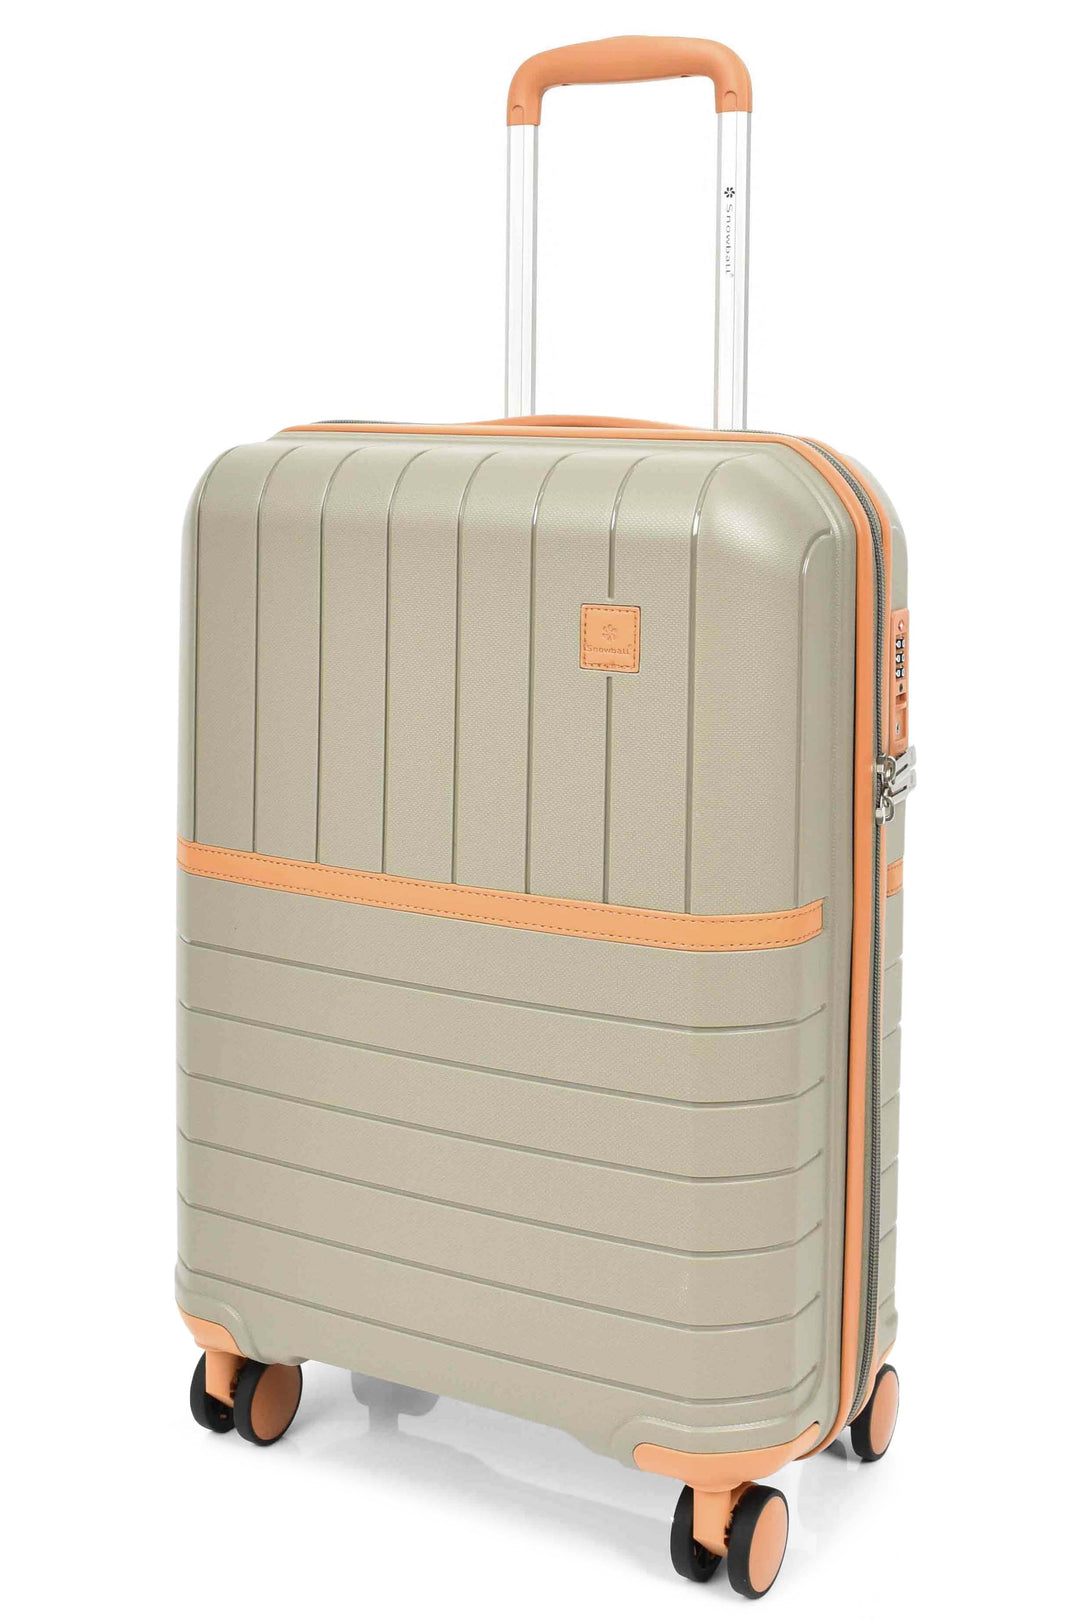 Excursion Hard Shell Suitcase 11